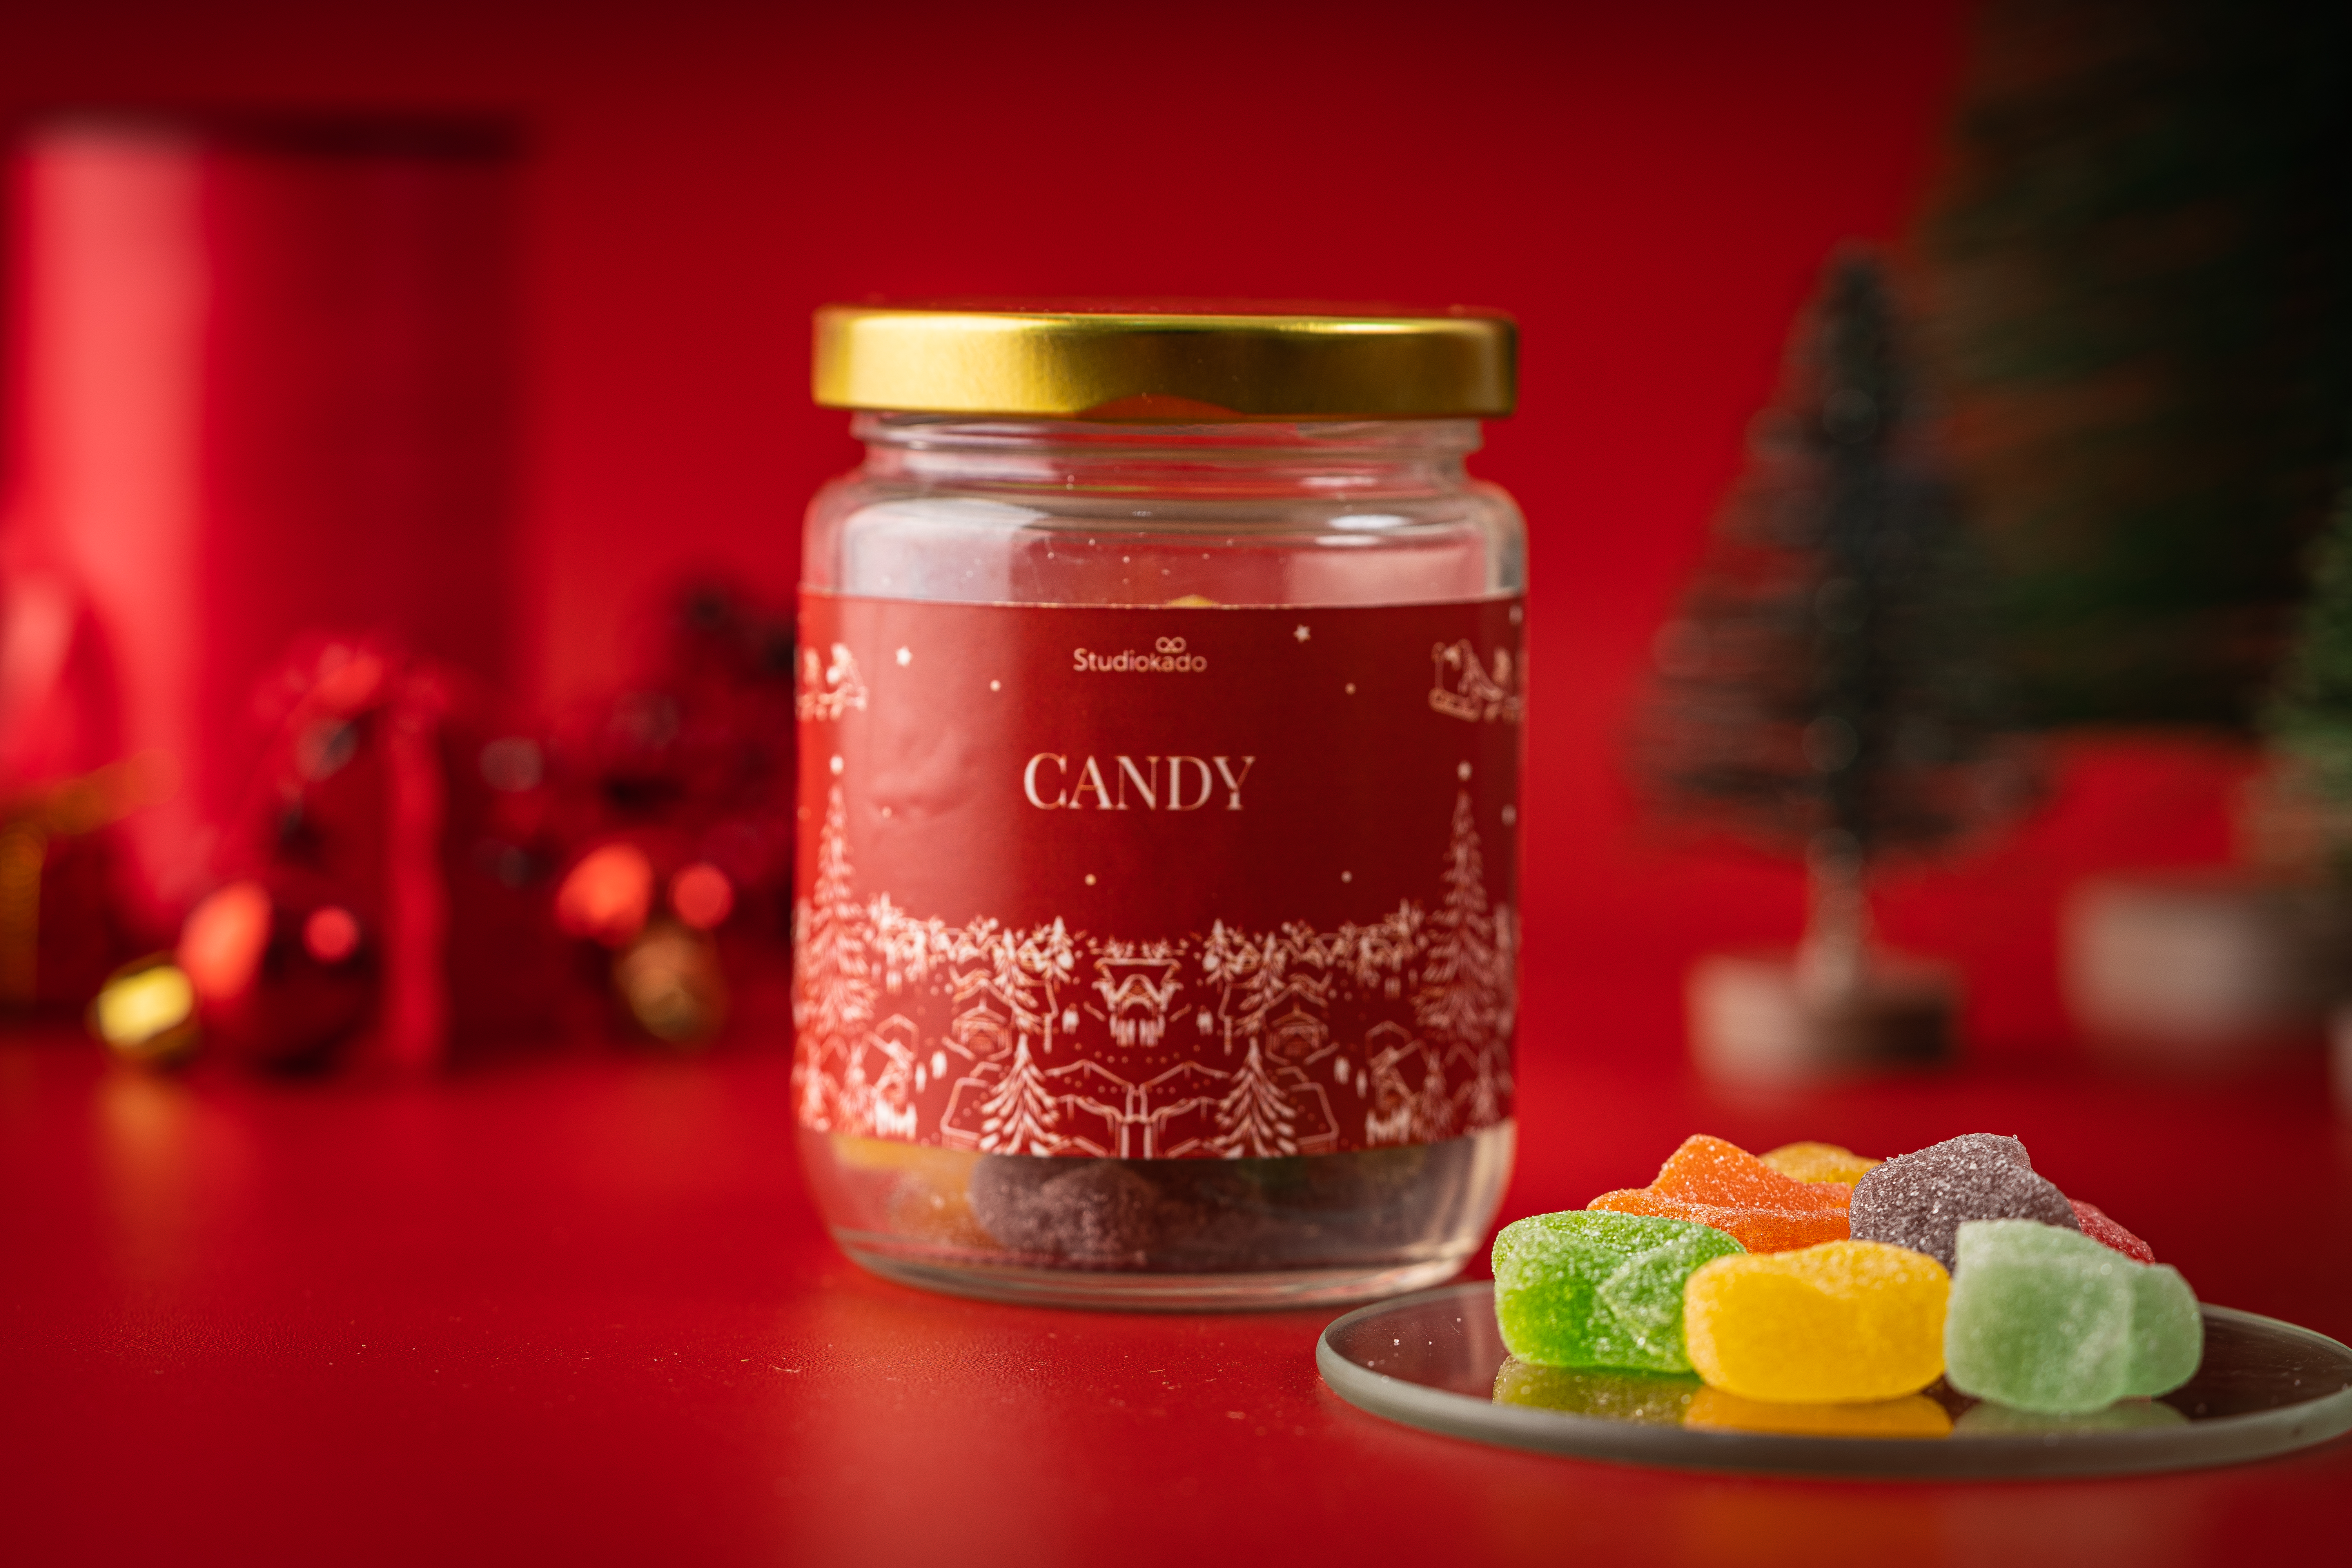 Release your inner sweettooth with some candy